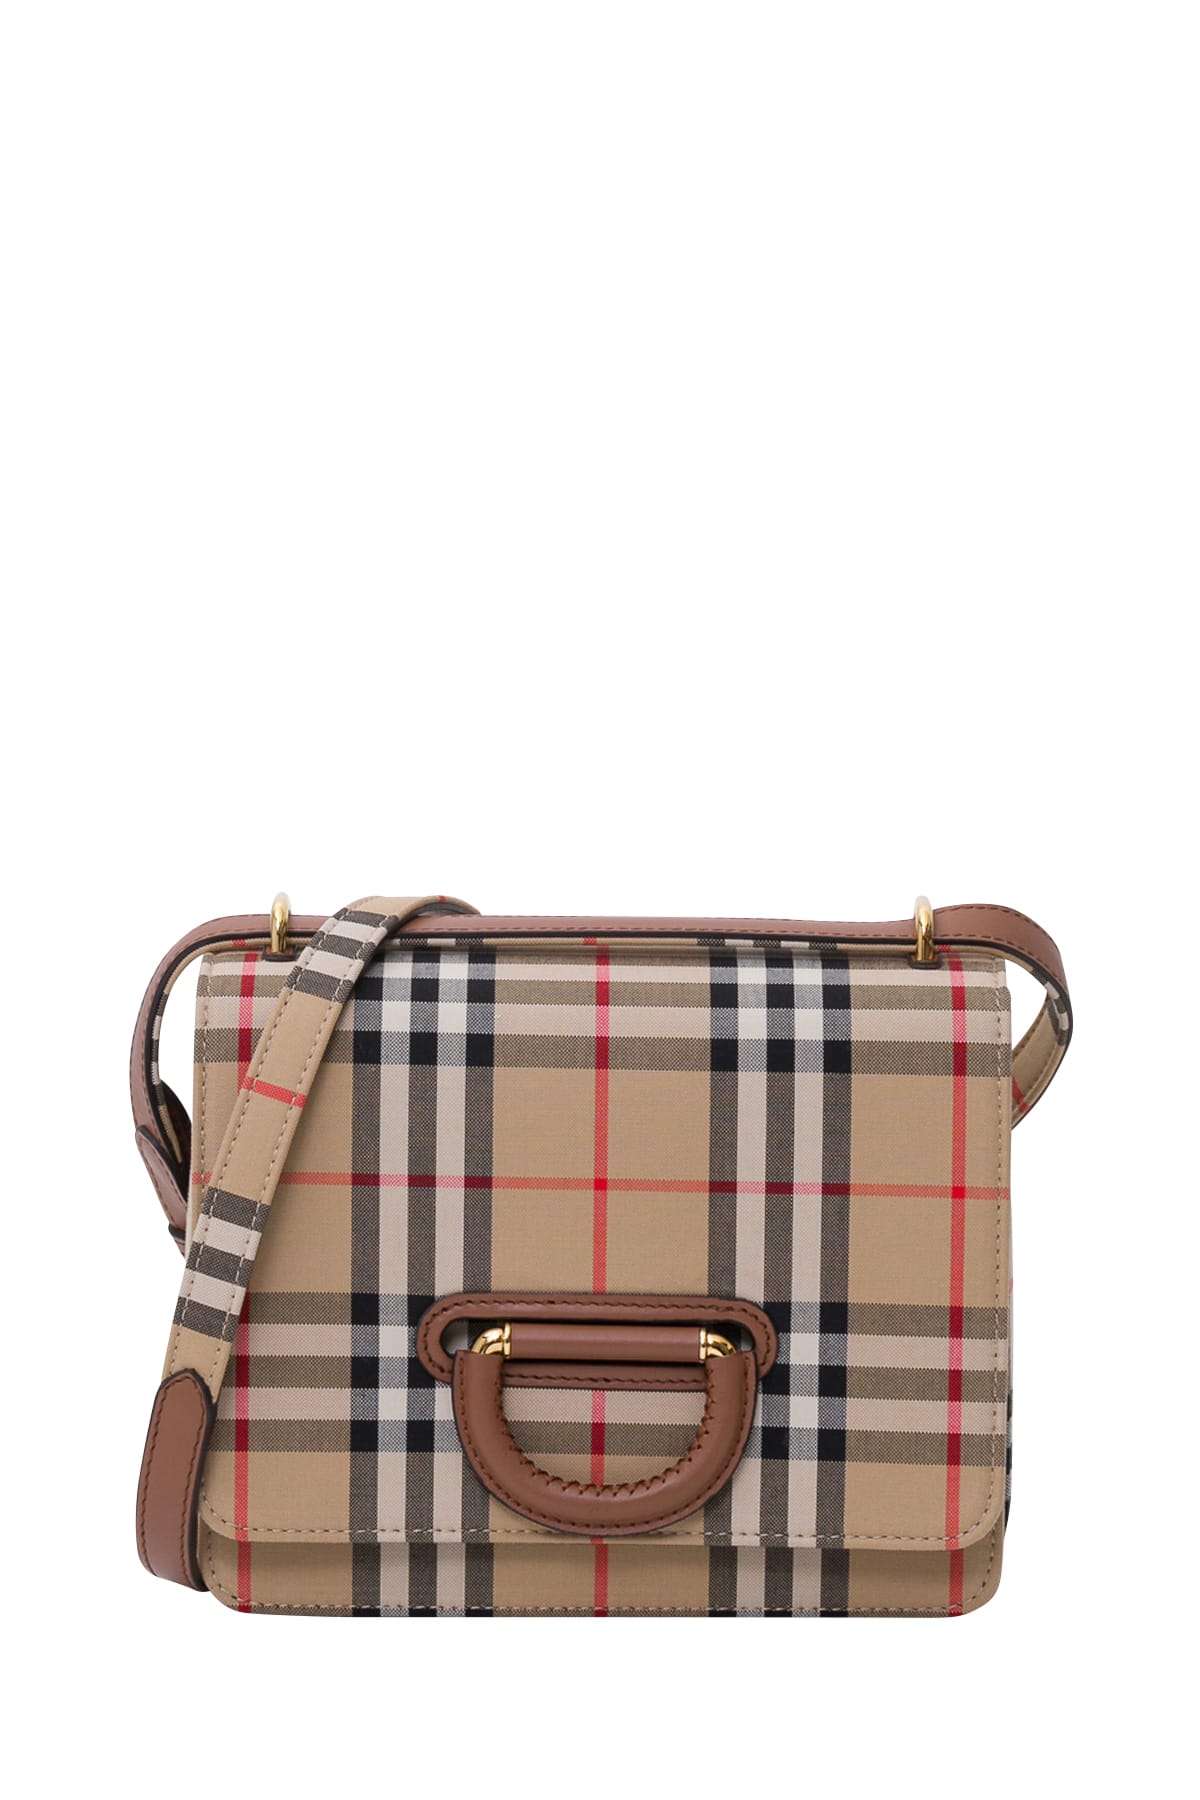 Burberry Small Vintage Check D-ring Bag 